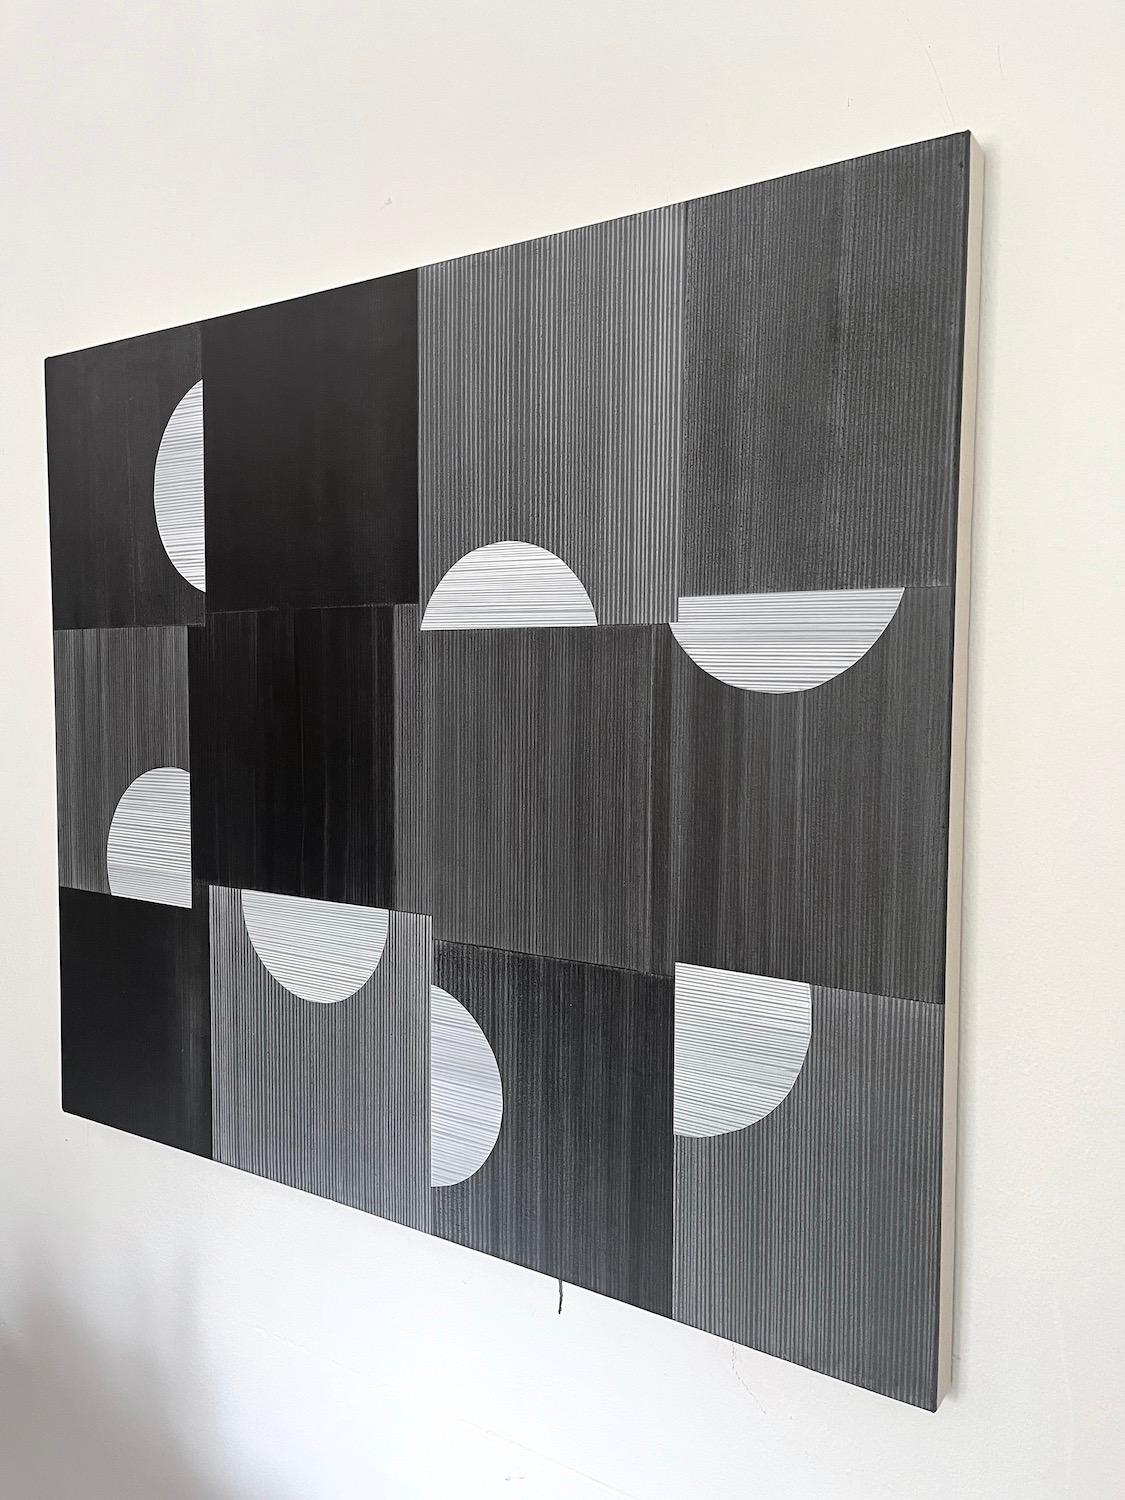 <p>Artist Comments<br>Artist Patrick Duffy creates an abstract dialogue between the imagination and the fundamentals of all things space. He paints half-crescent moons emerging within linear forms in a geometric abstract. 